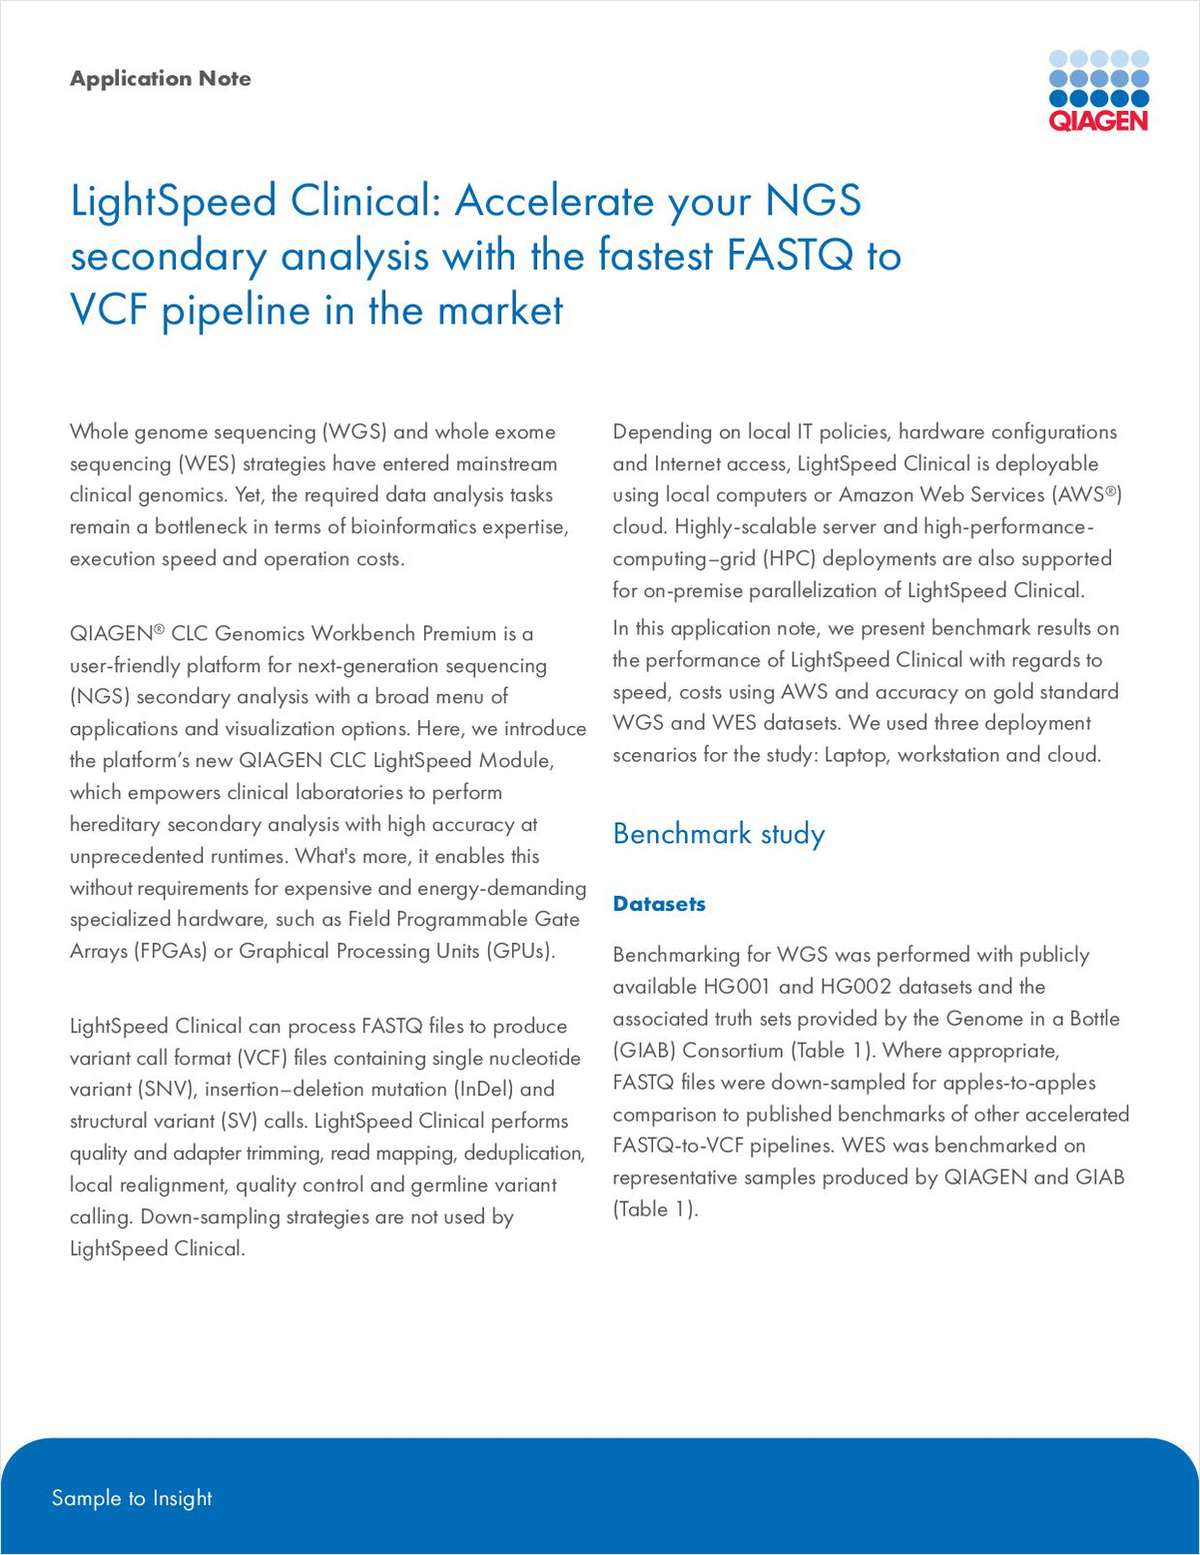 Lightspeed Clinical: Accelerate Your NGS Secondary Analysis With the Fastest FASTQ to VCF Pipeline in the Market